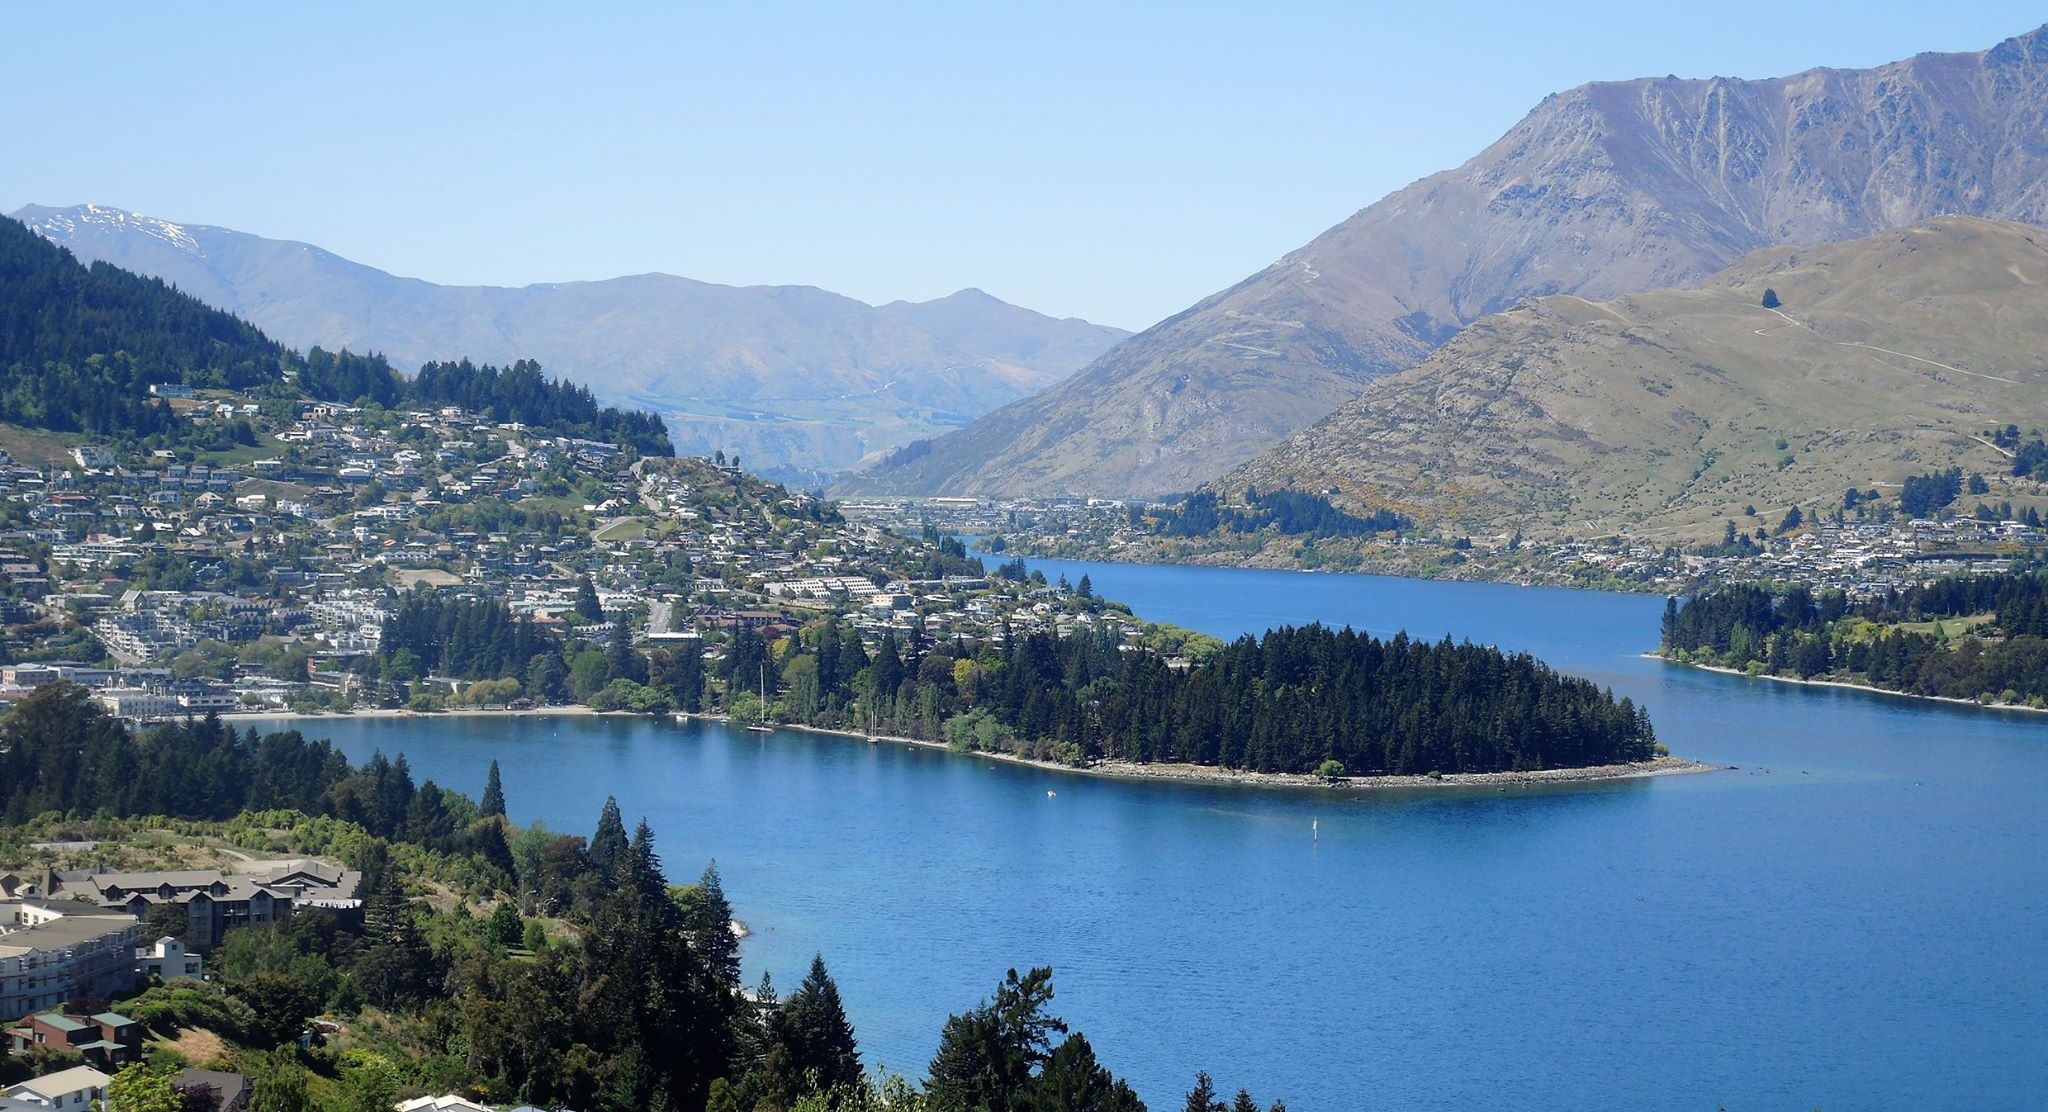 Queenstown and Remarkables in South Island of New Zealand